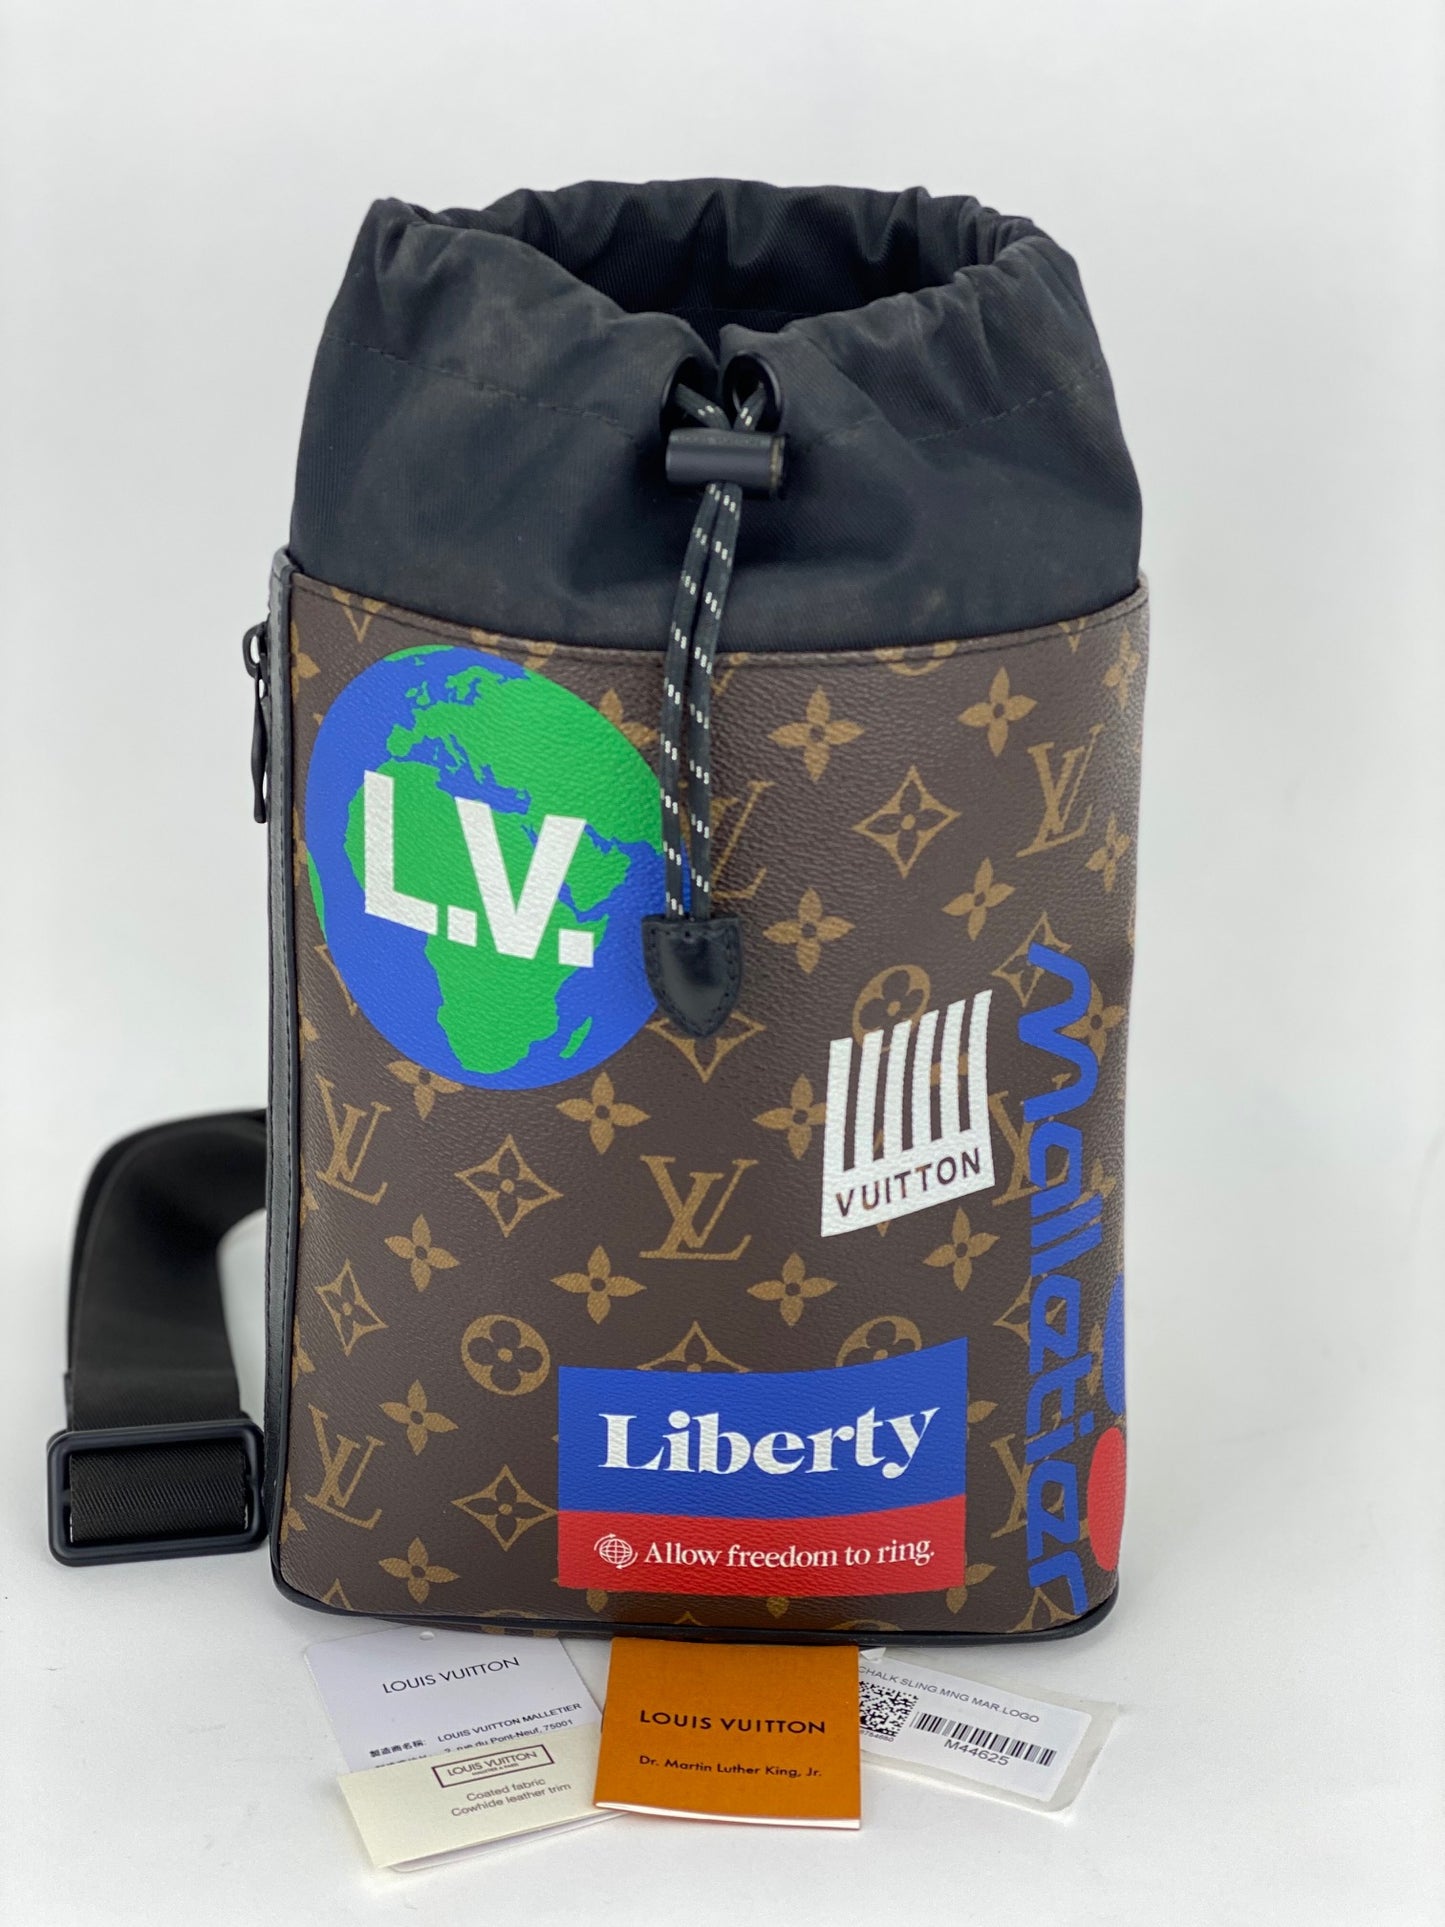 Louis Vuitton Palm Springs PM Monogram Canvas Backpack Travel School M44871  Preowned